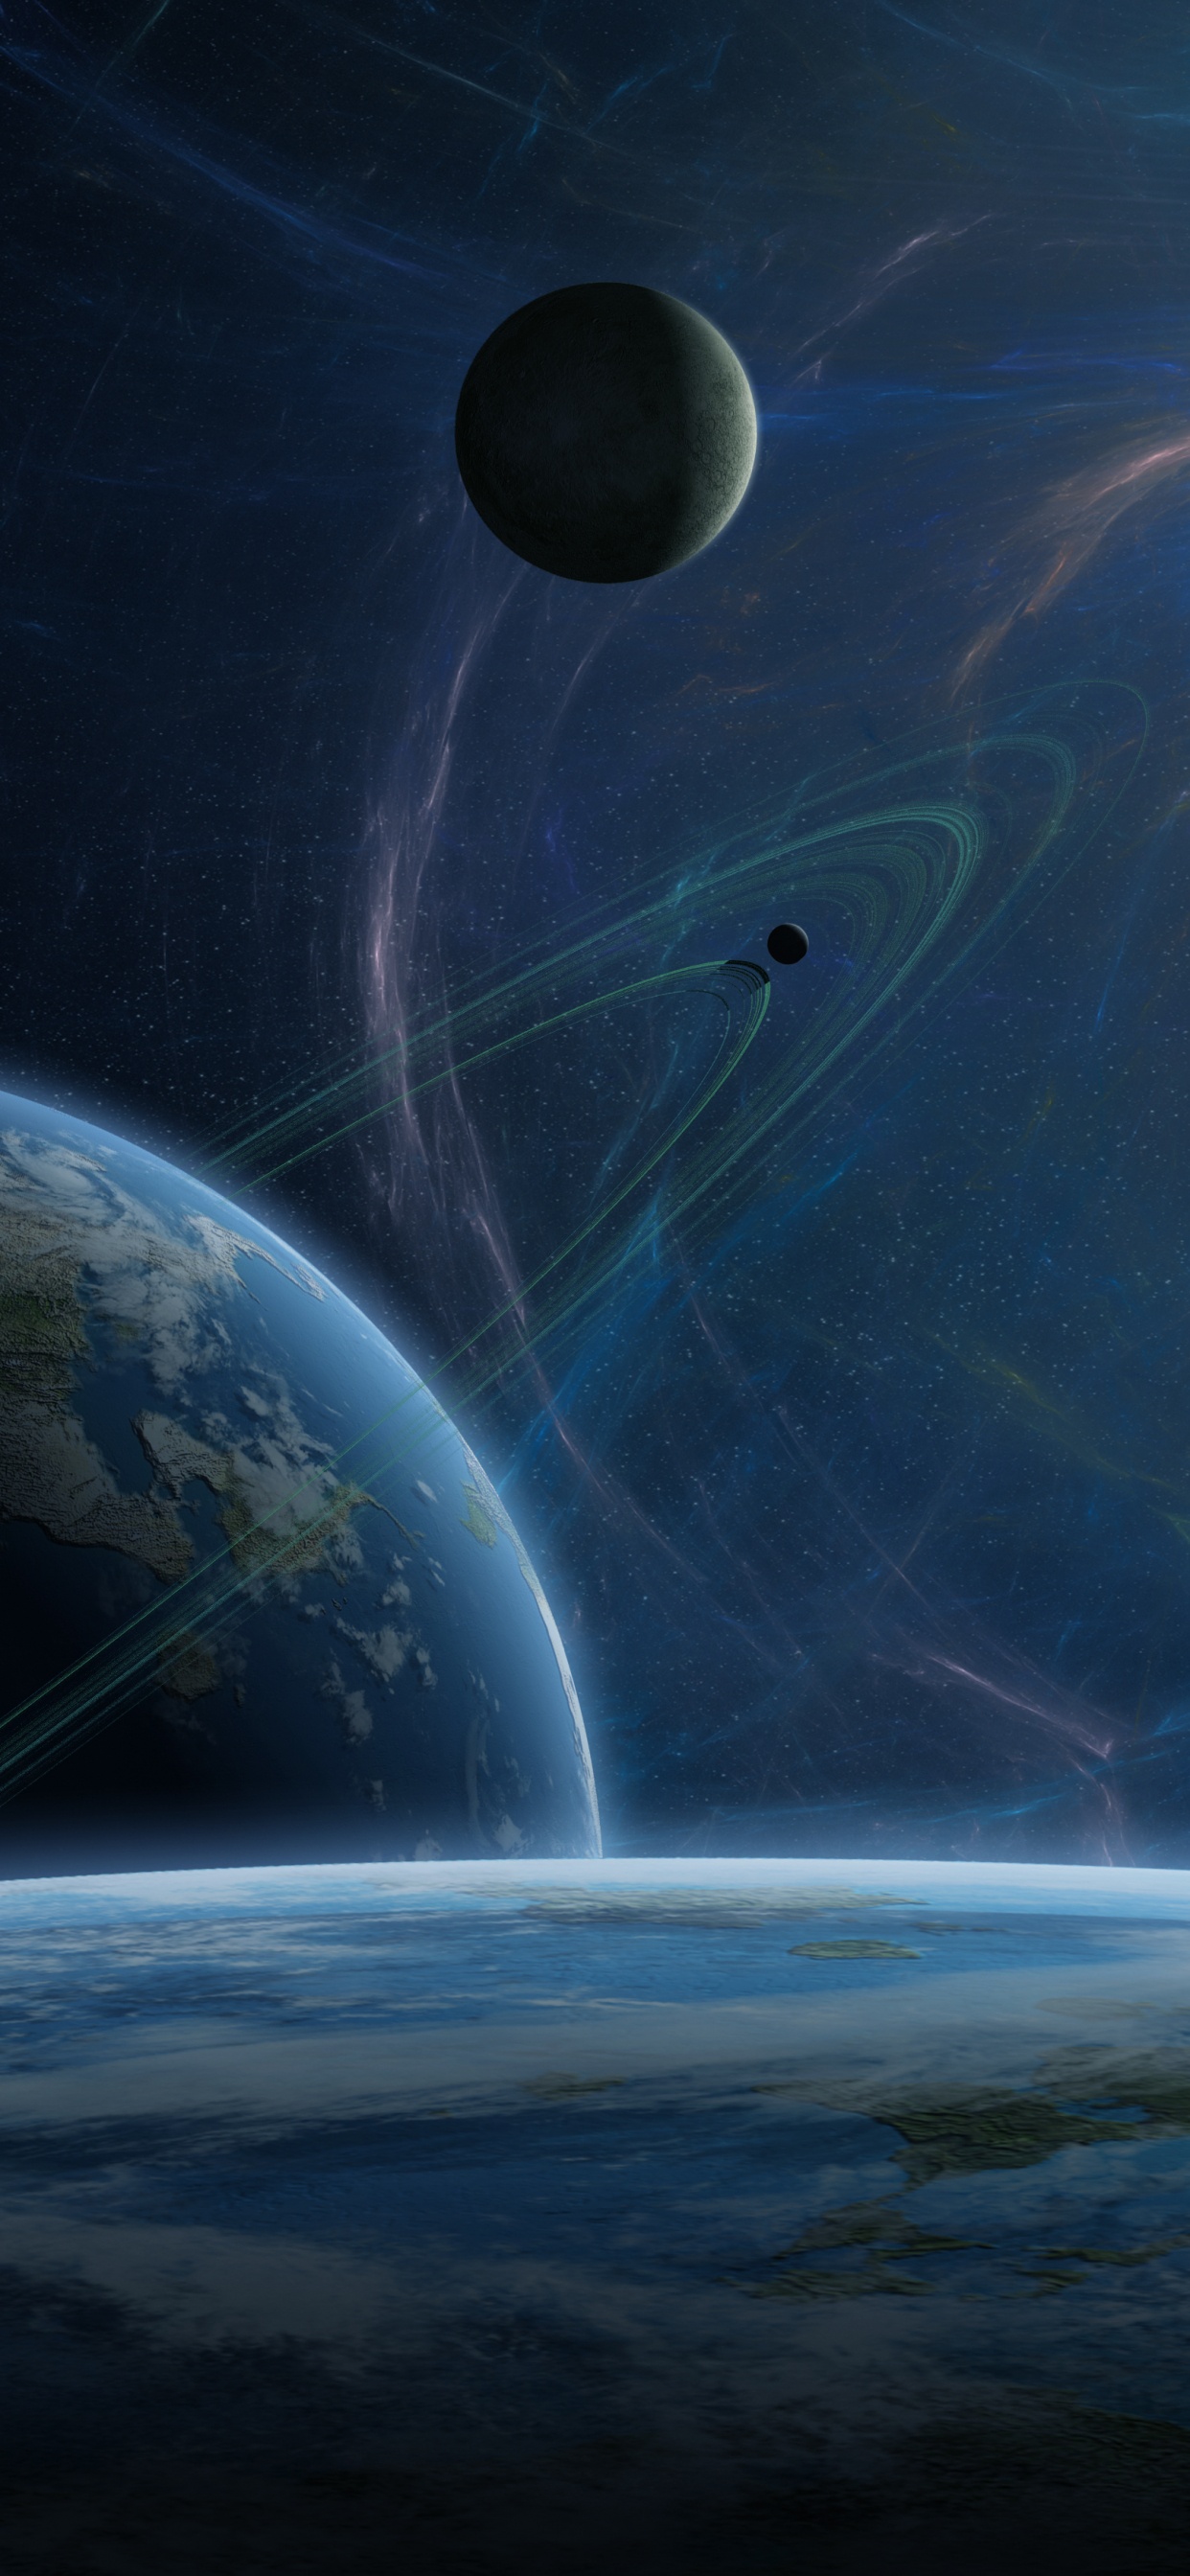 Blue and White Planet Illustration. Wallpaper in 1242x2688 Resolution